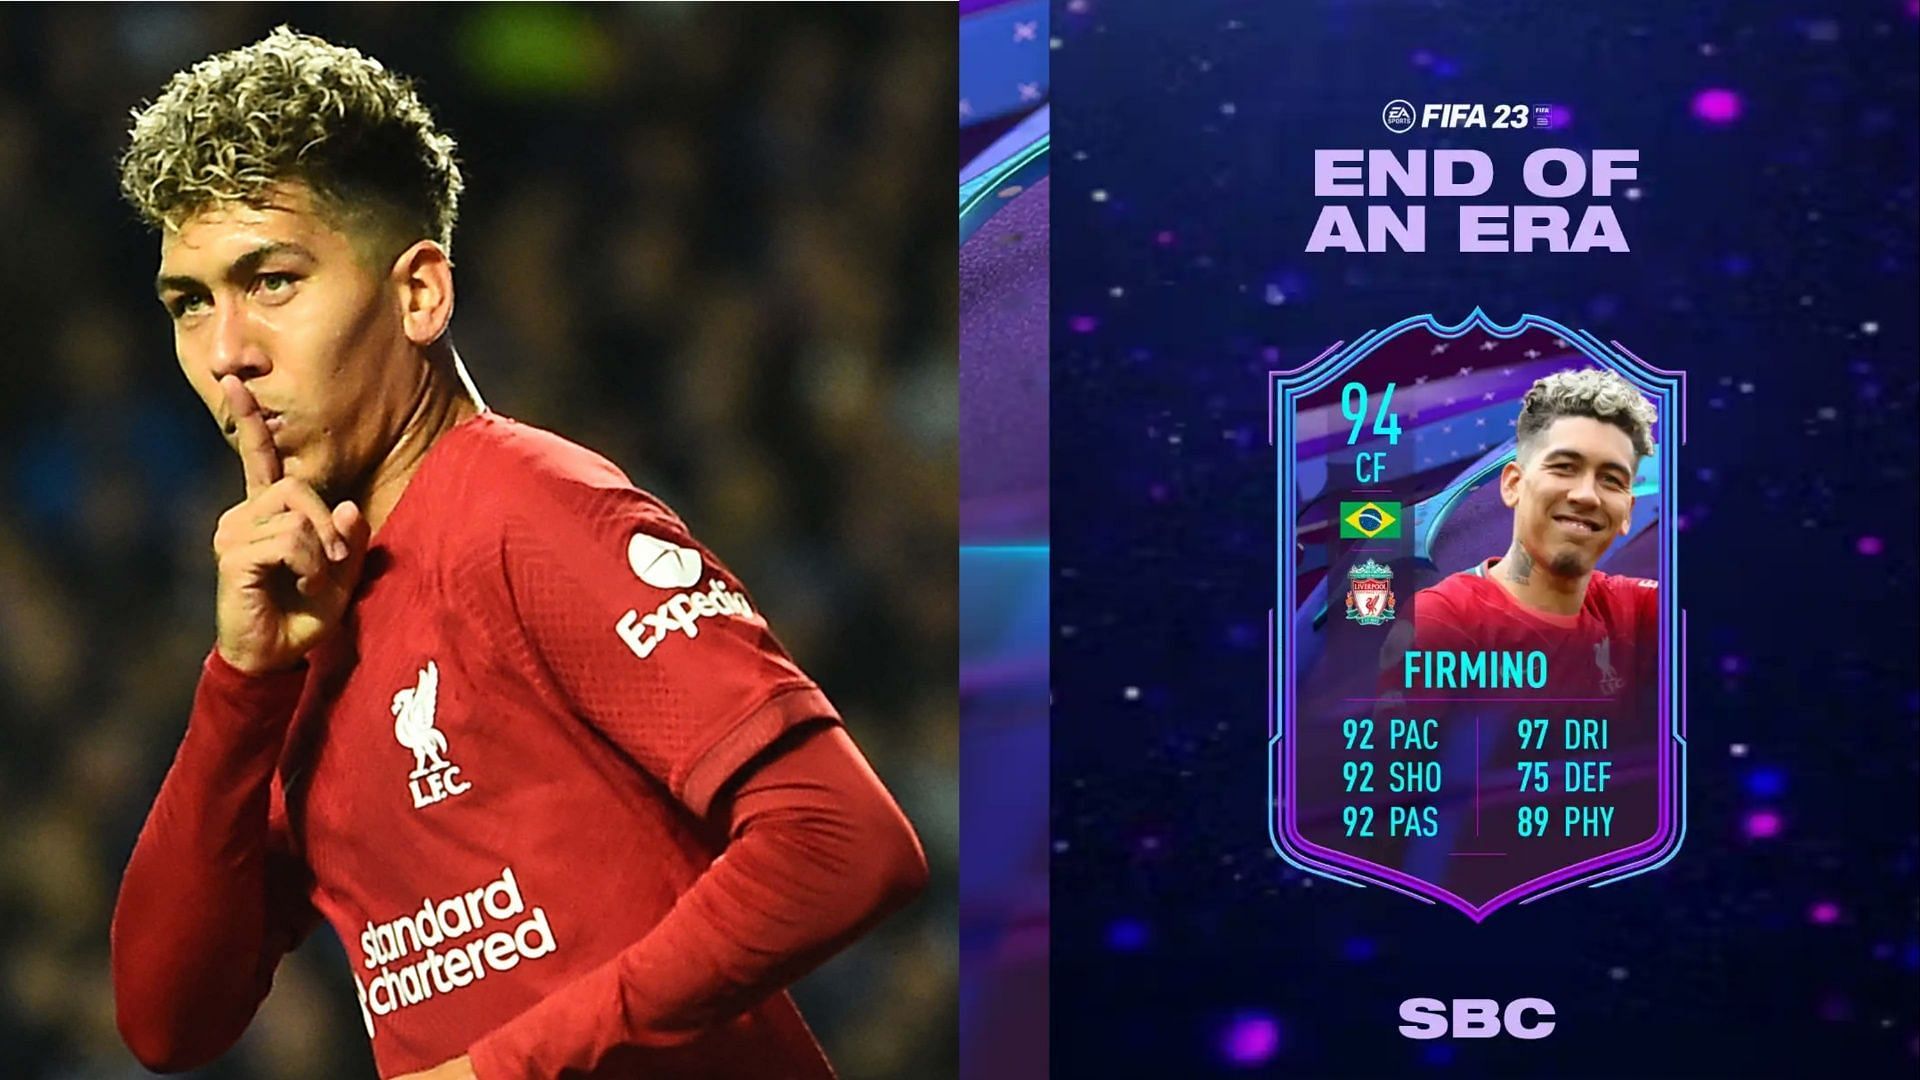 All information about the rumored Roberto Firmino End of an Era SBC in FIFA 23 (Images via Goal, Twitter/FIFAUteam)